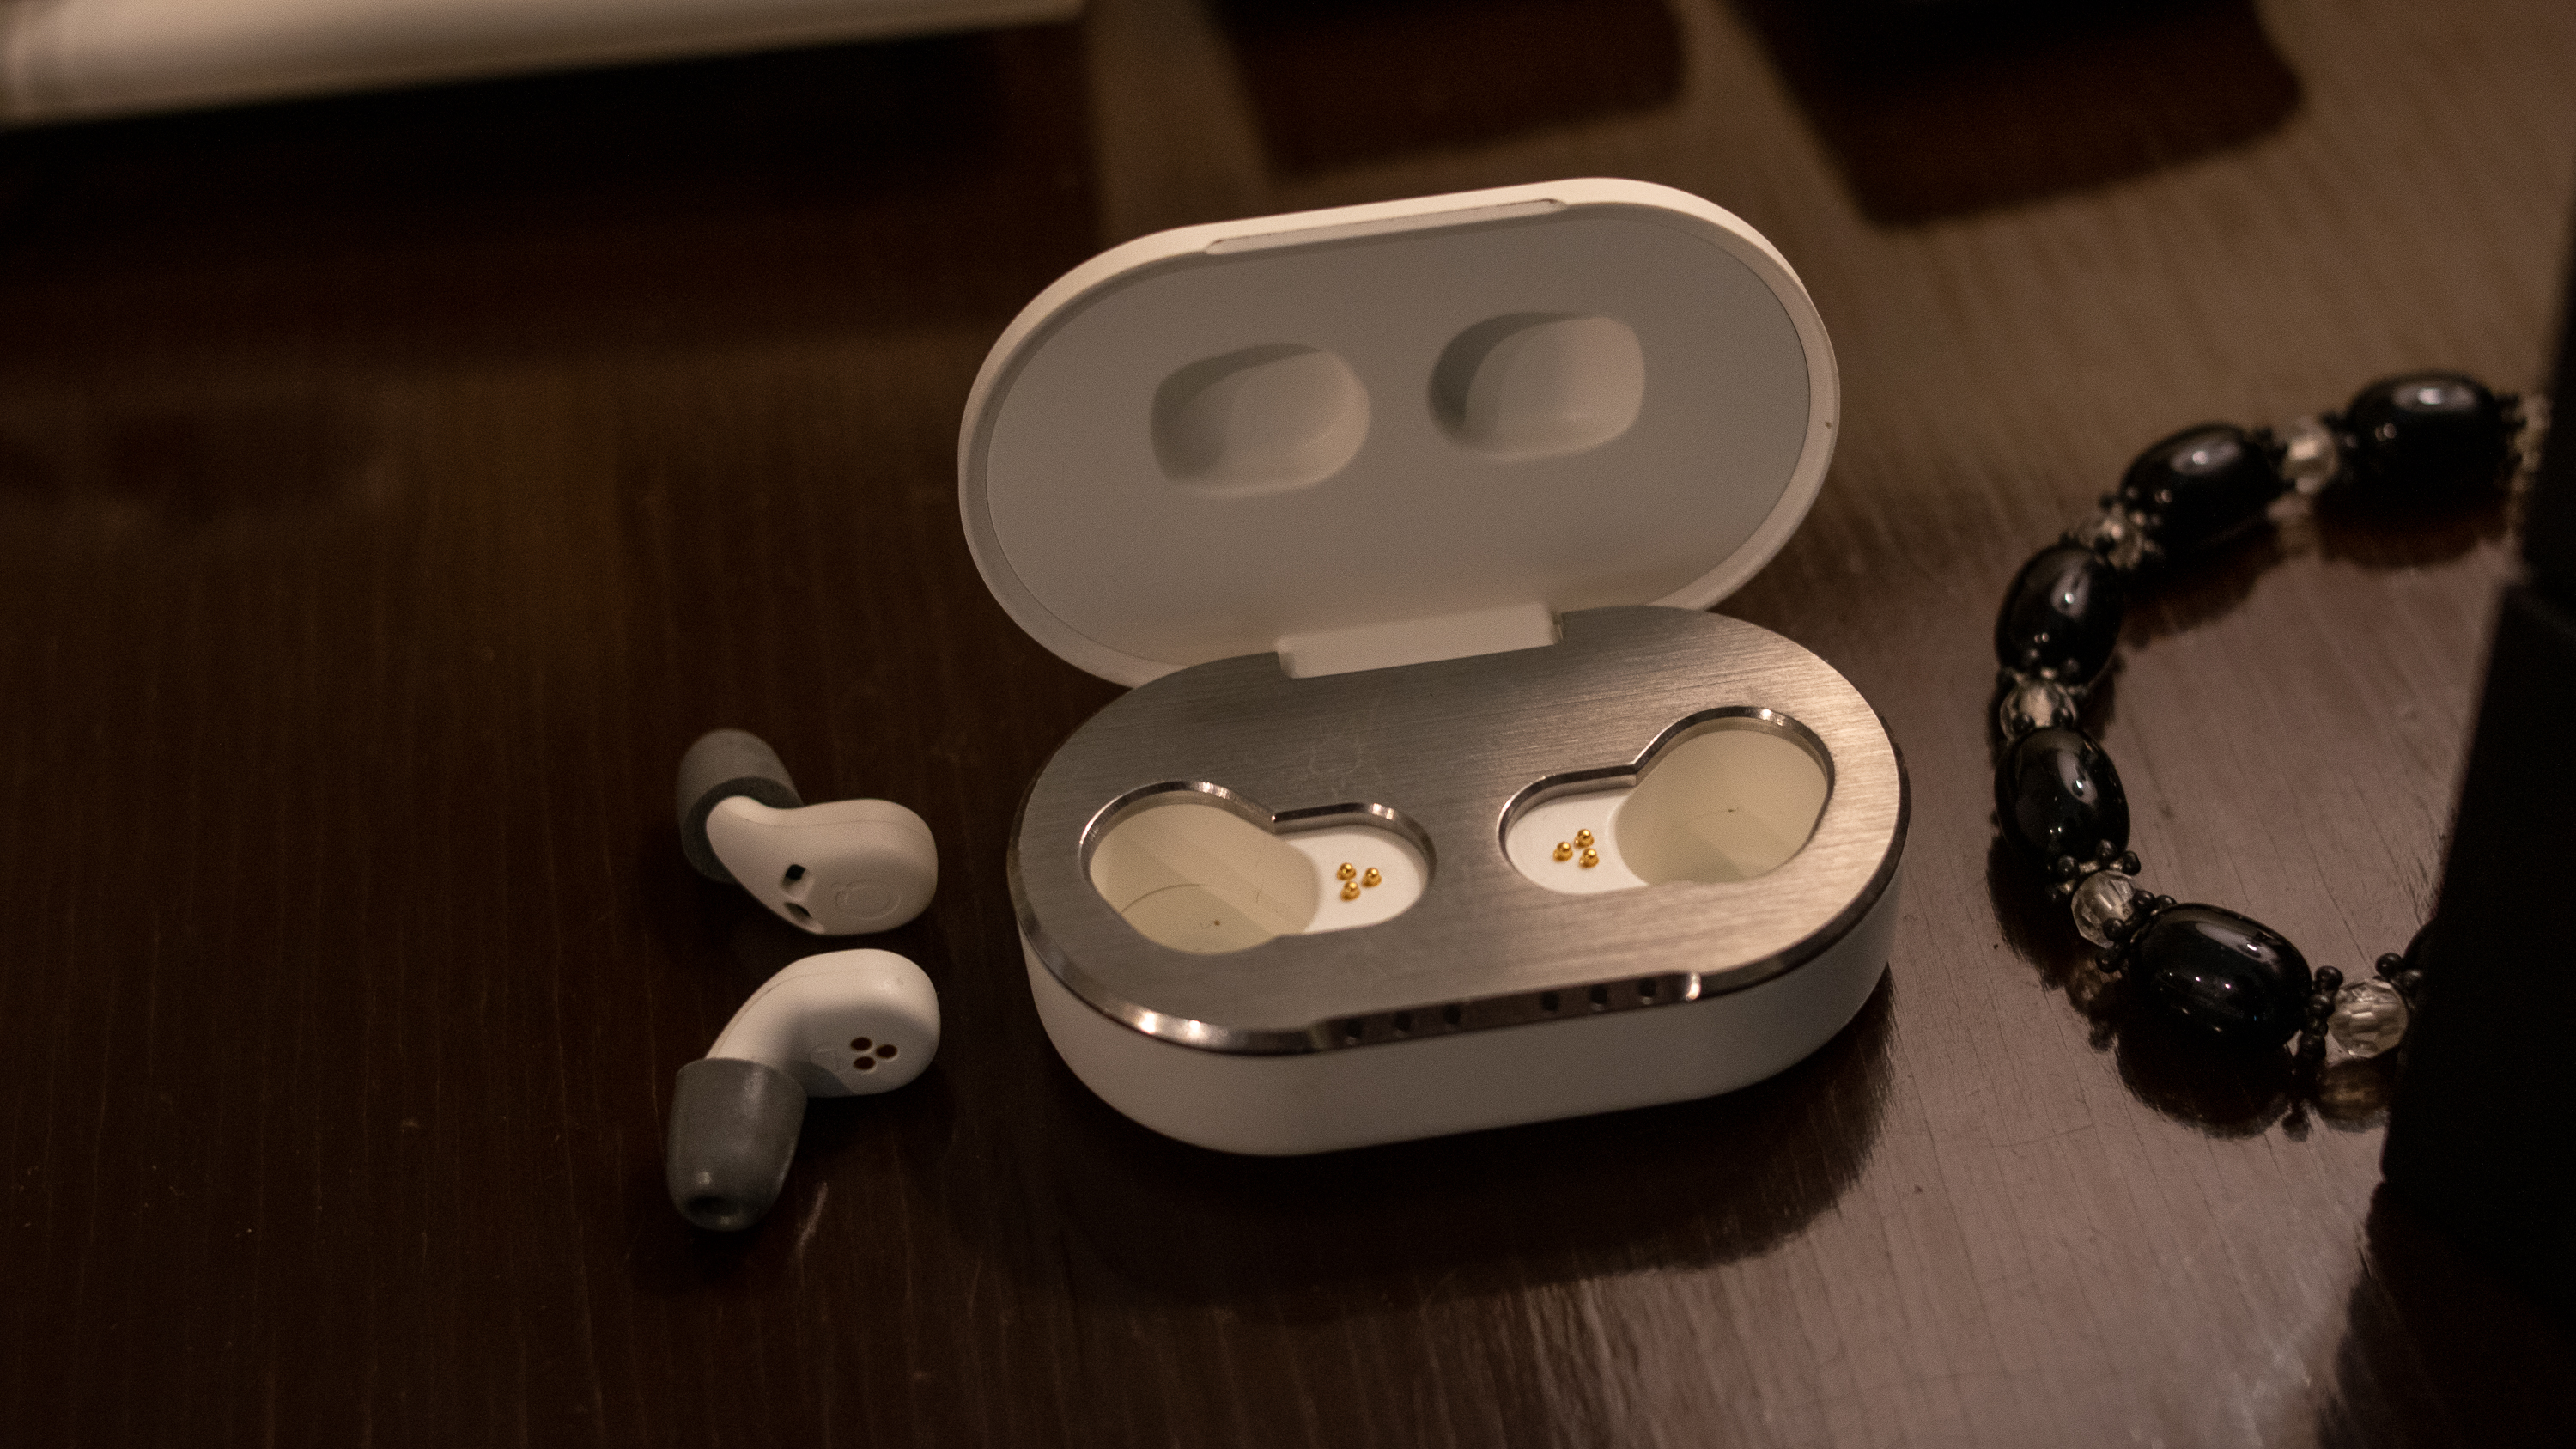 QuietOn 3.1 charging case and earbuds